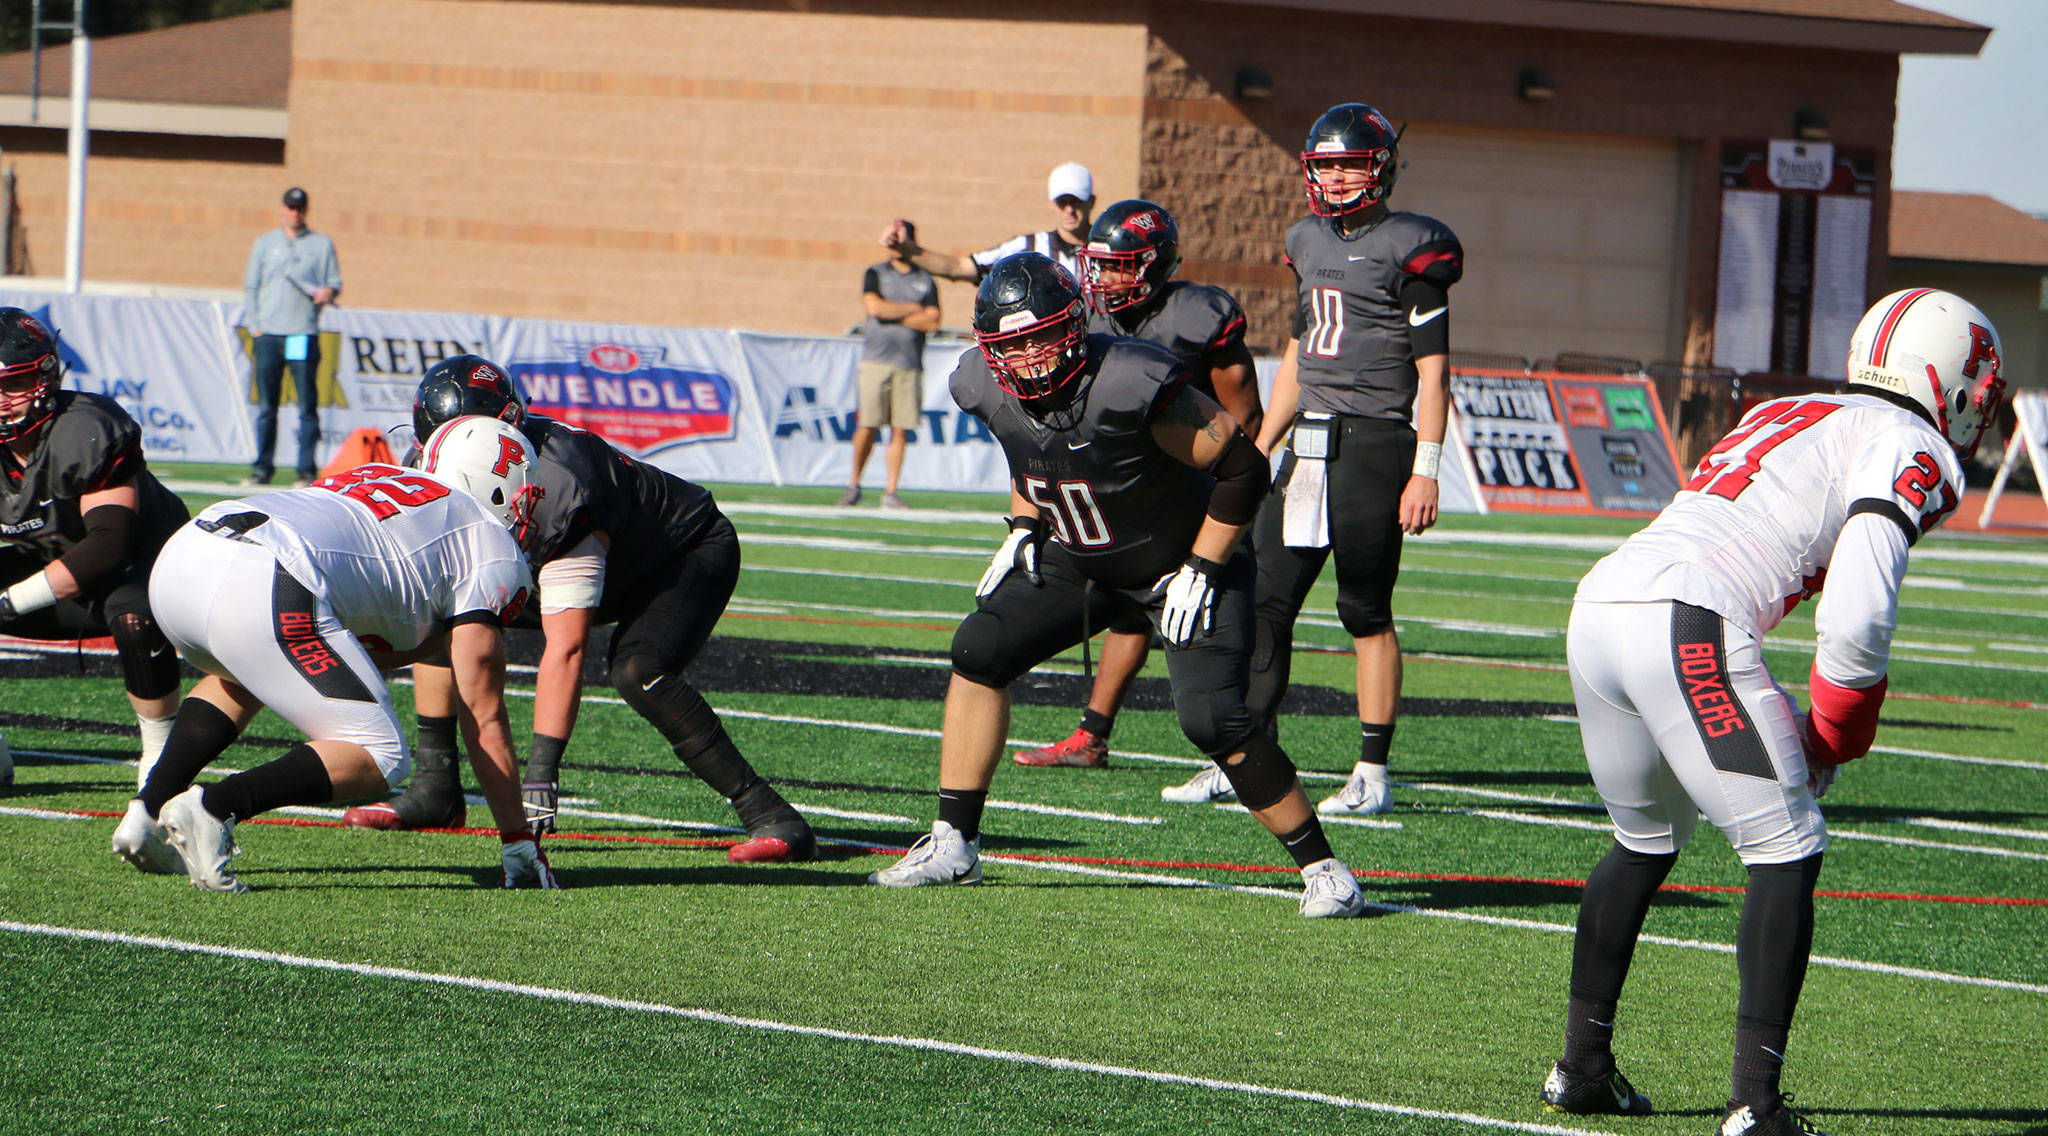 Tyler Adamson (50), playing for Whitworth University, was named to the all-Northwest Conference first team for the third time this season. (Photo courtesy of Whitworth Athletics)